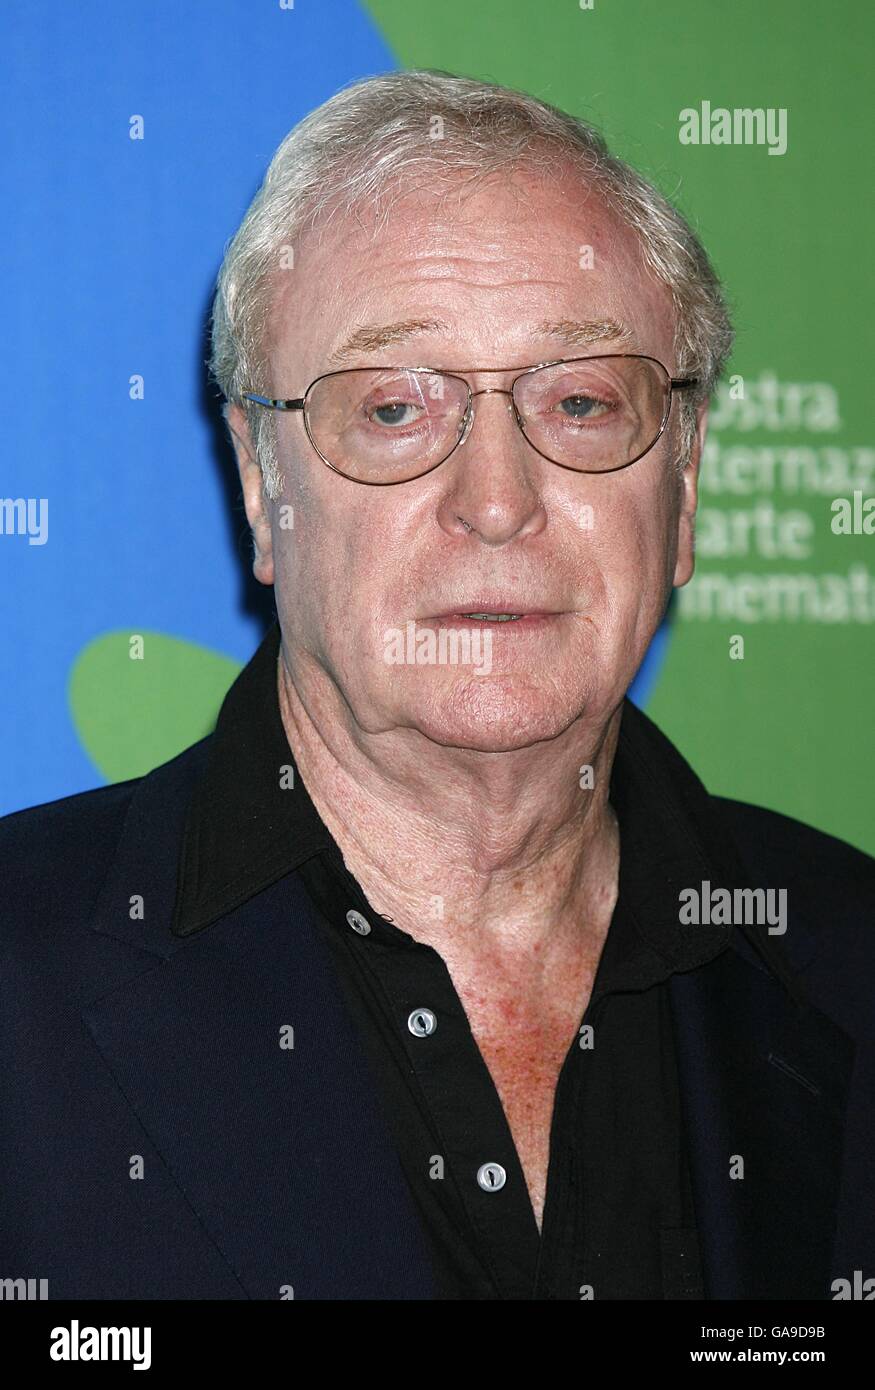 Sir Michael Caine attends a photocall for the film Sleuth at the 64th Venice International Film Festival. Stock Photo